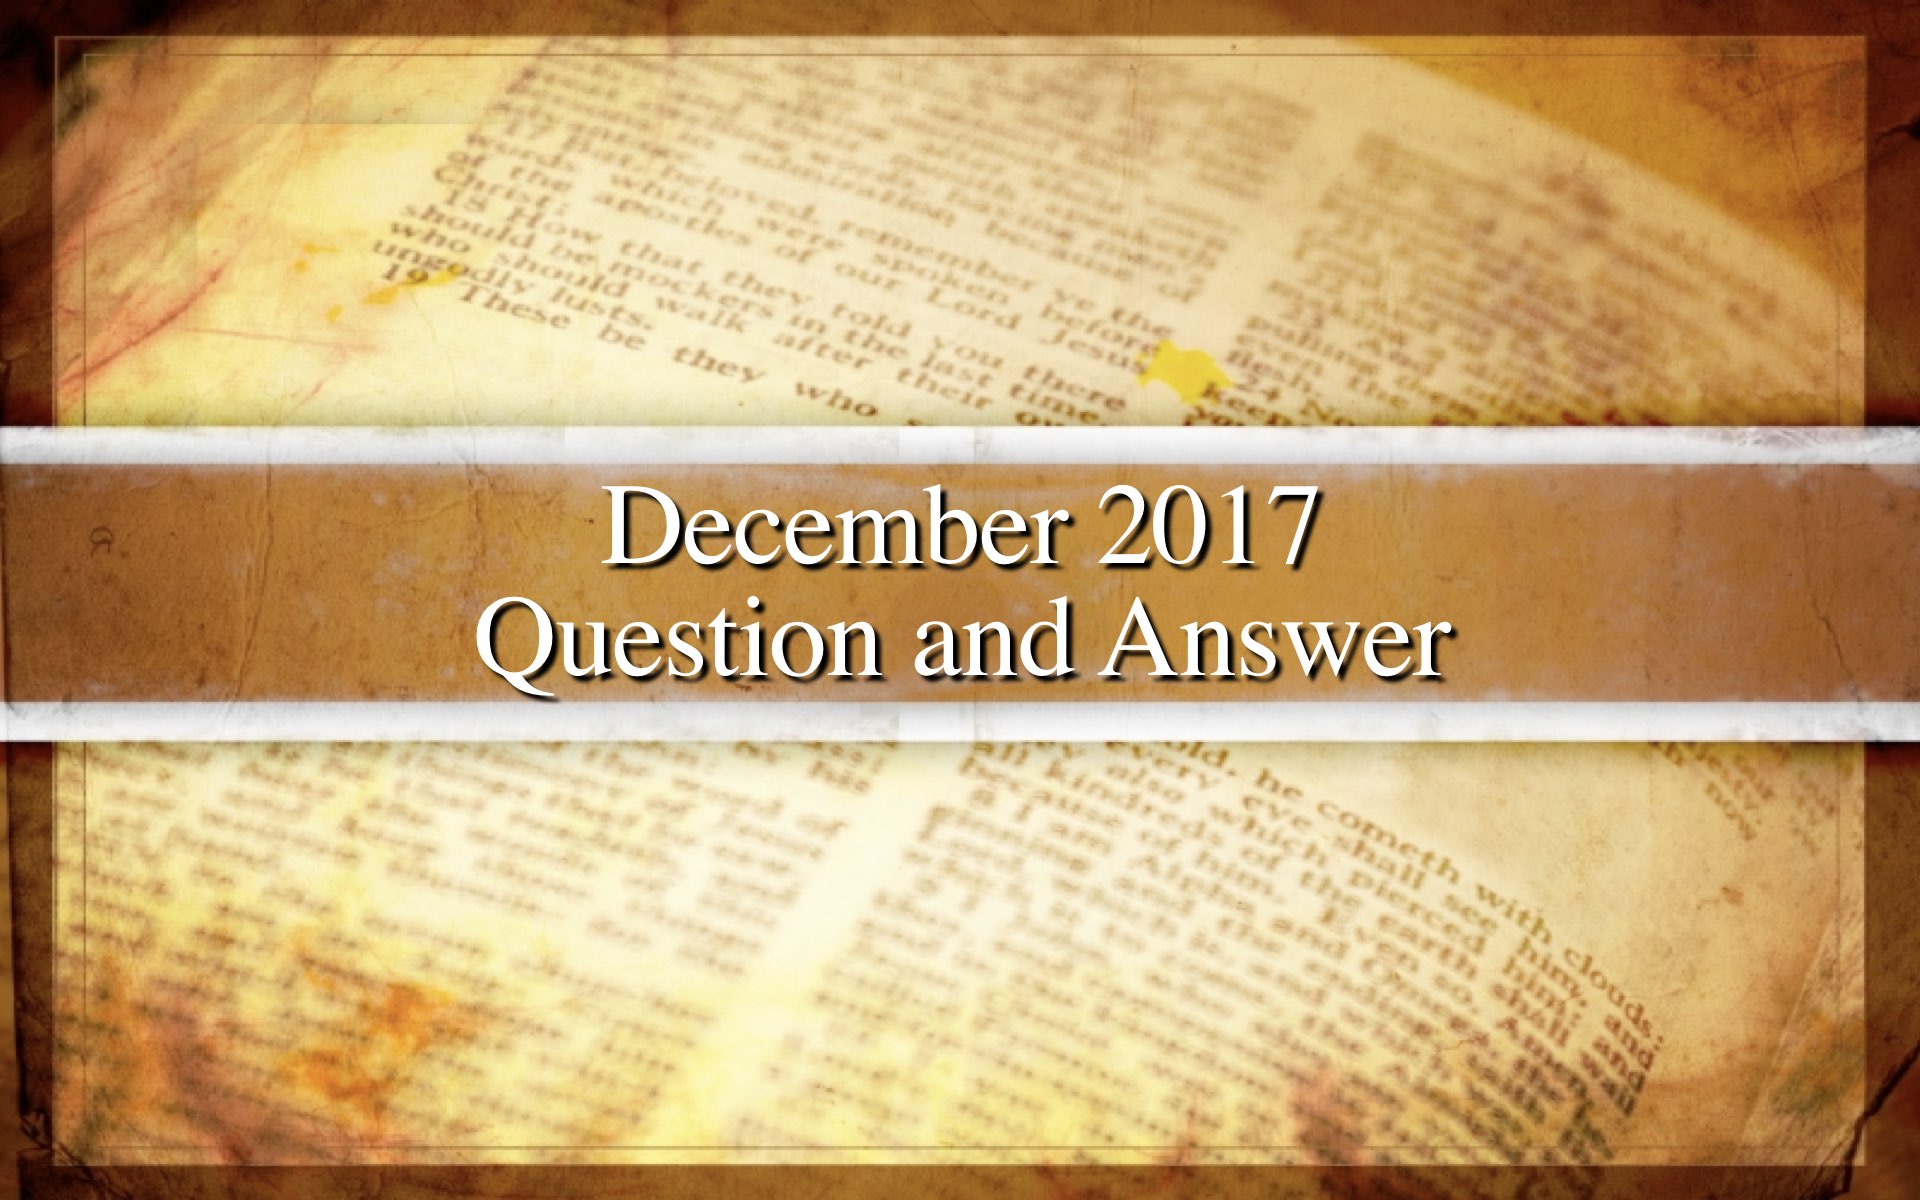 December 2017 Question and Answer